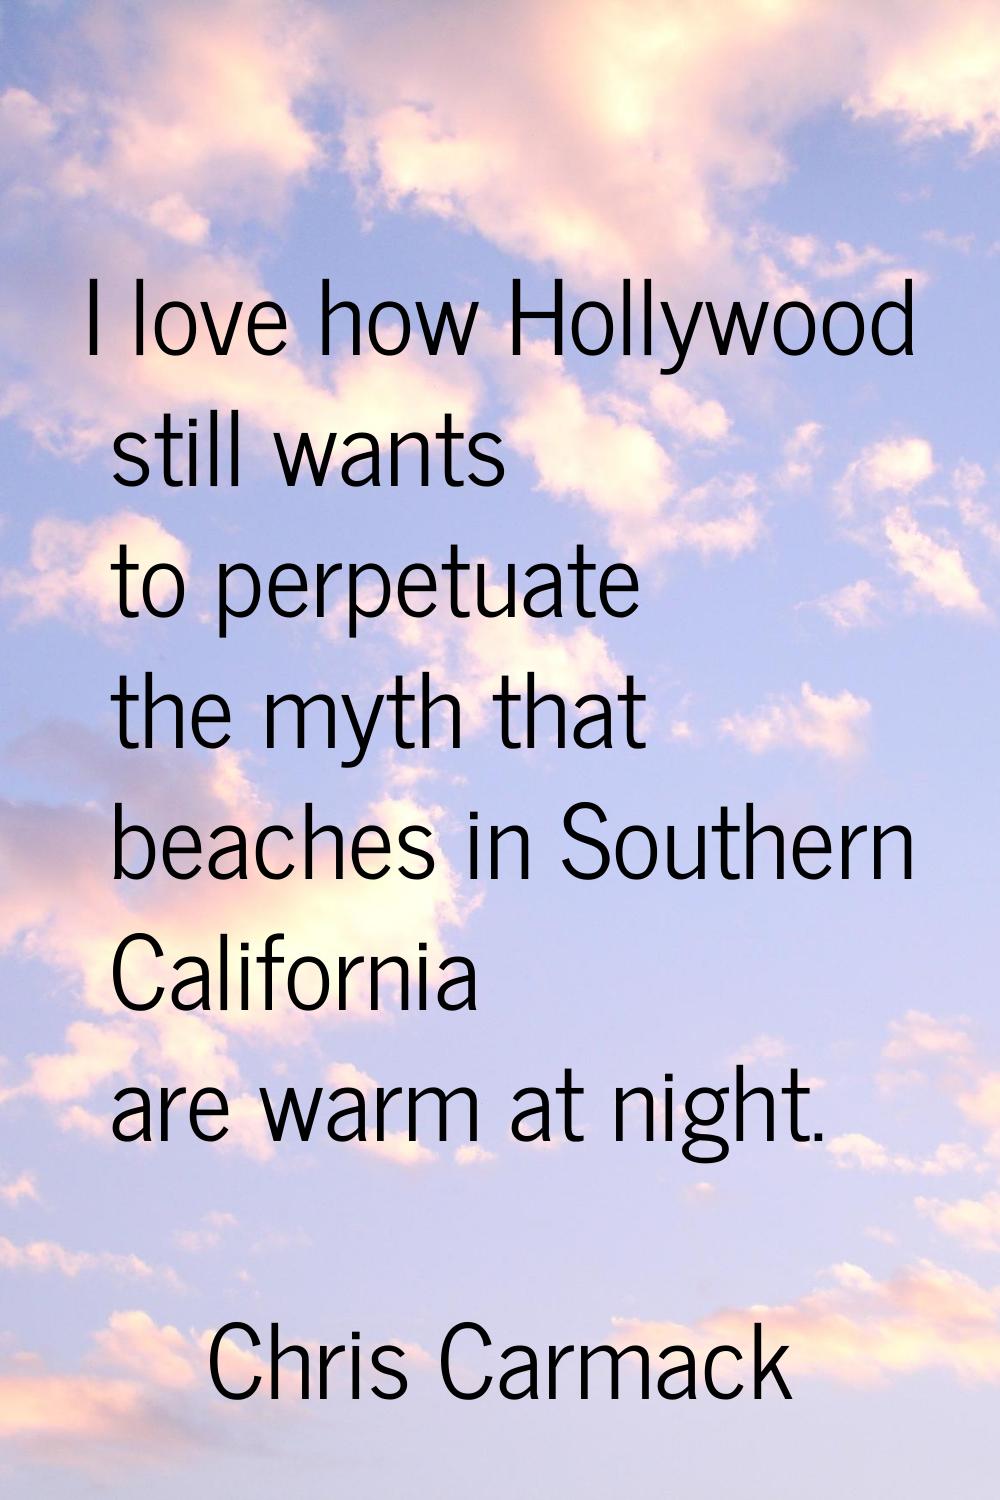 I love how Hollywood still wants to perpetuate the myth that beaches in Southern California are war